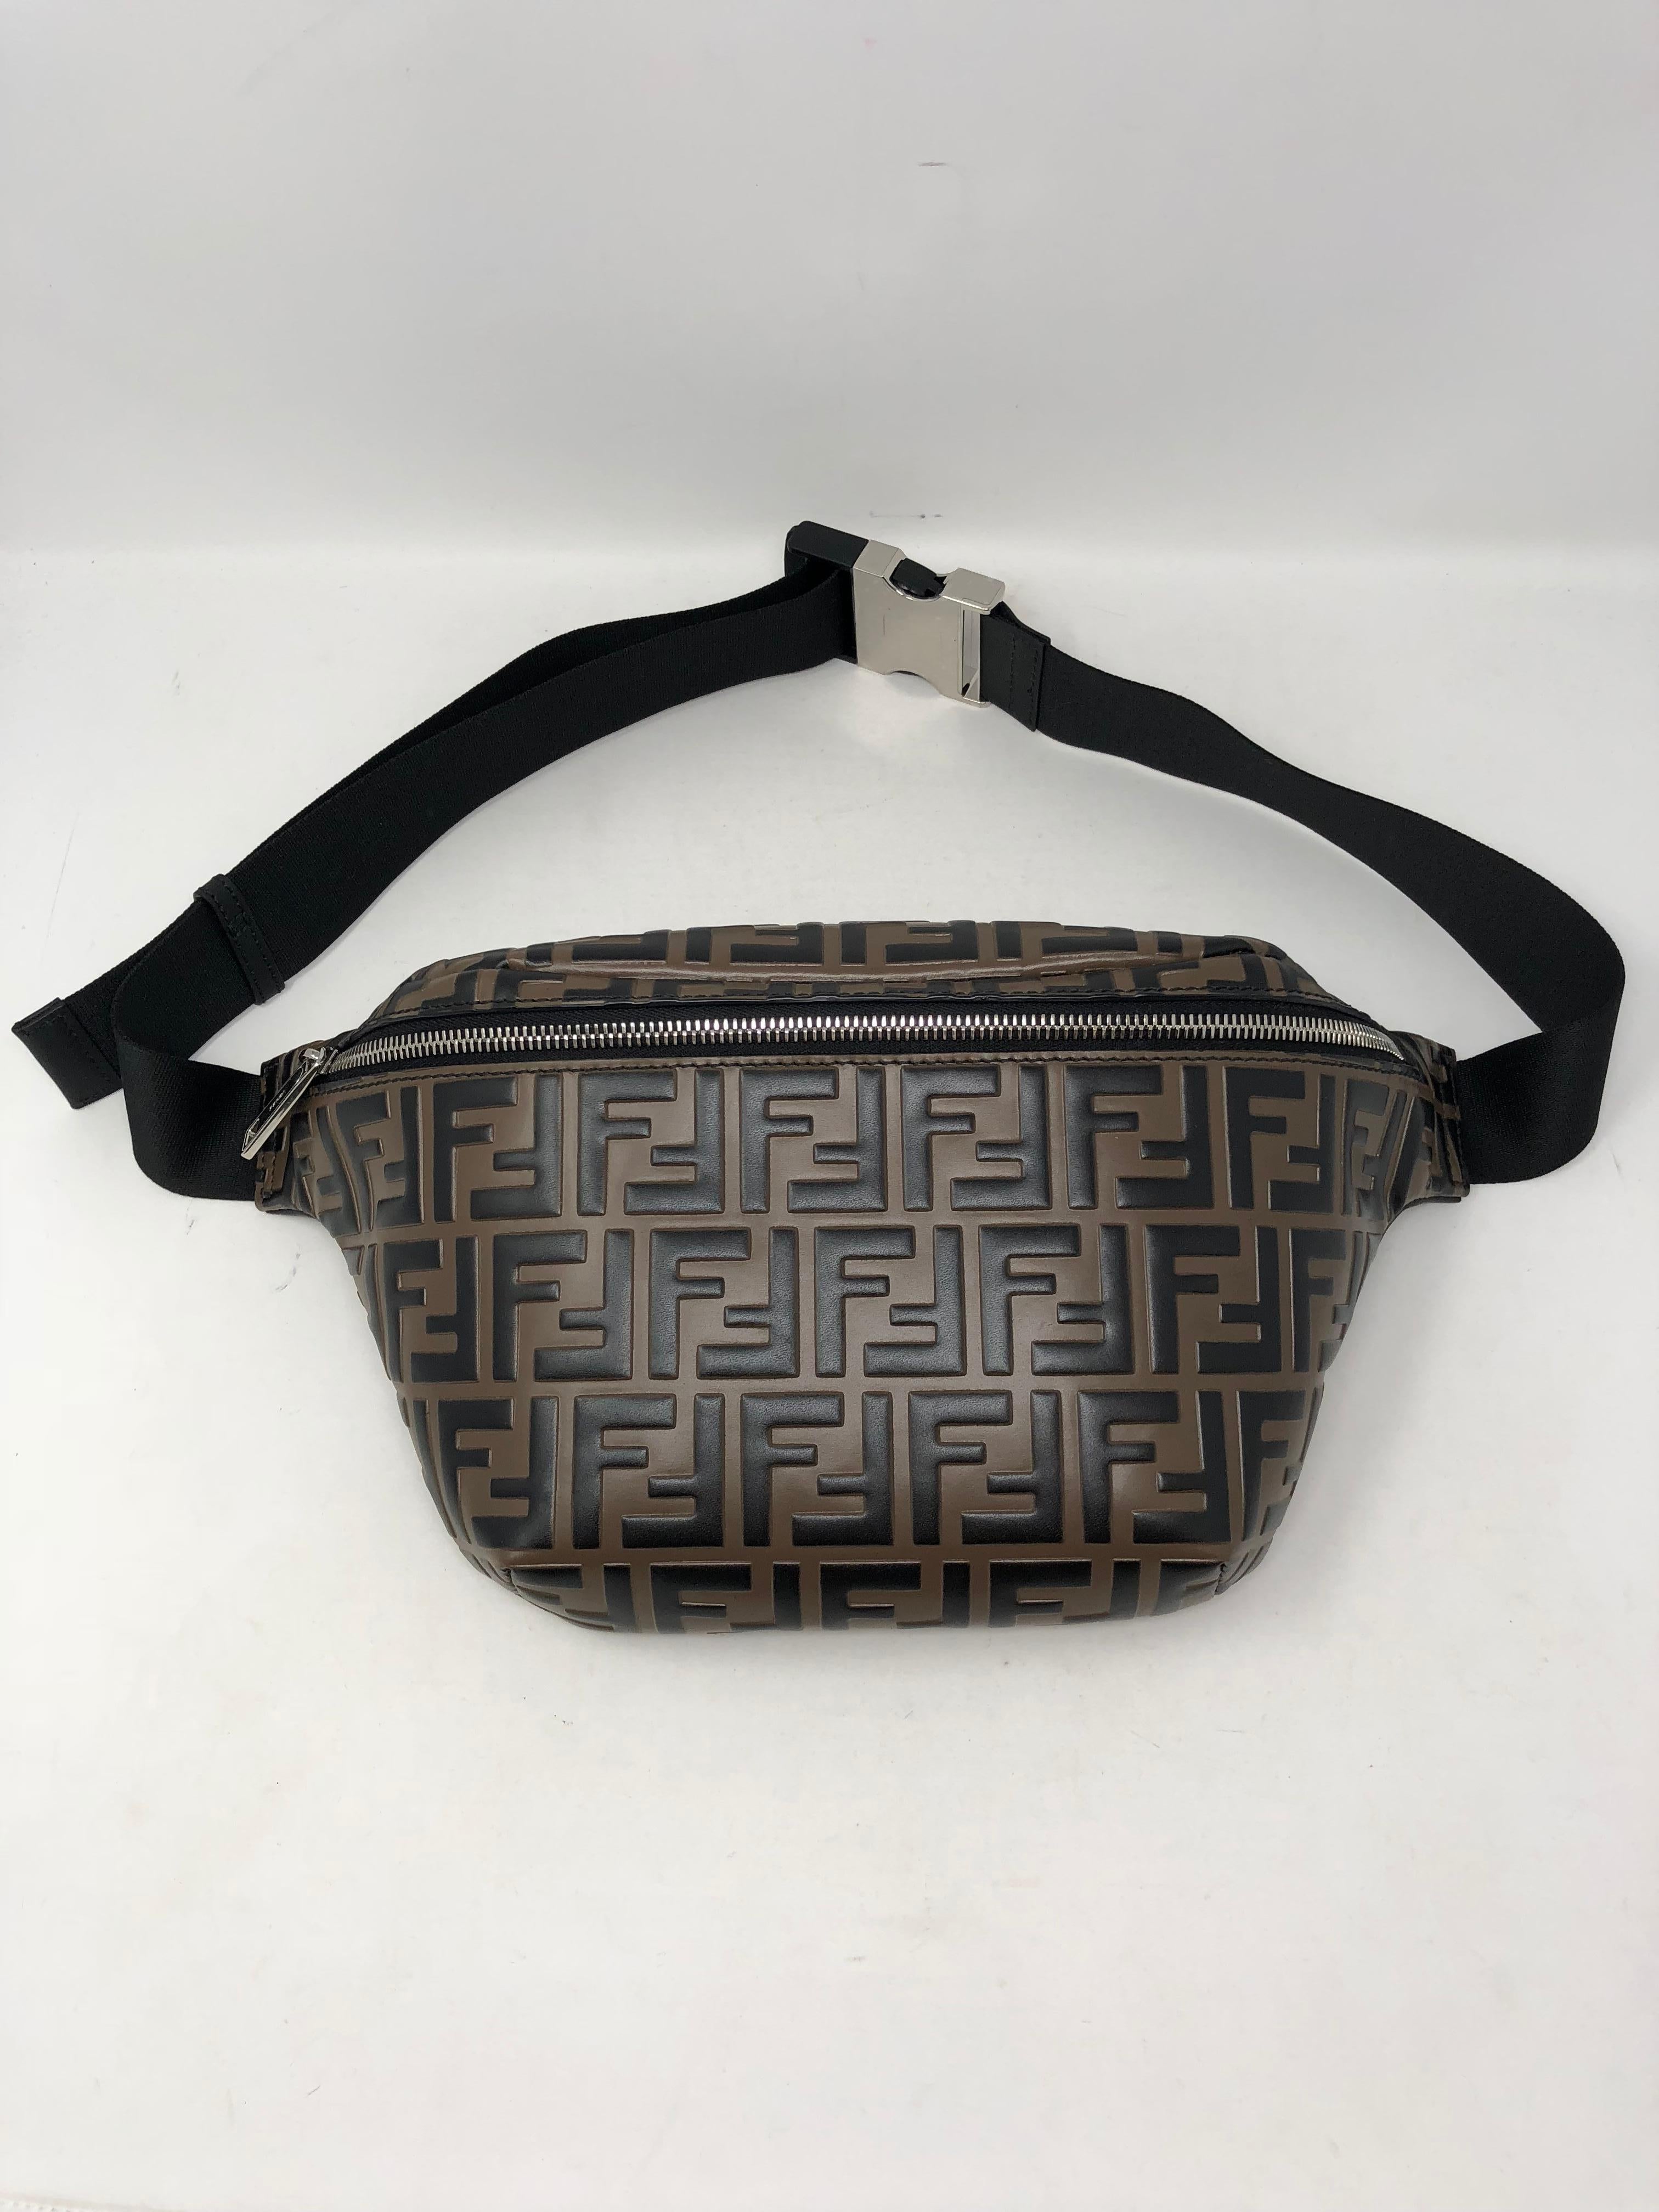 Fendi Embossed Belt Bag. Leather belt bag/fanny pack with Fendi logo embossed finish. Adjustable belt buckle strap. Made in Italy. Brand new. Hard to get now. Most wanted fanny pack and sling bag. Guaranteed authentic. 